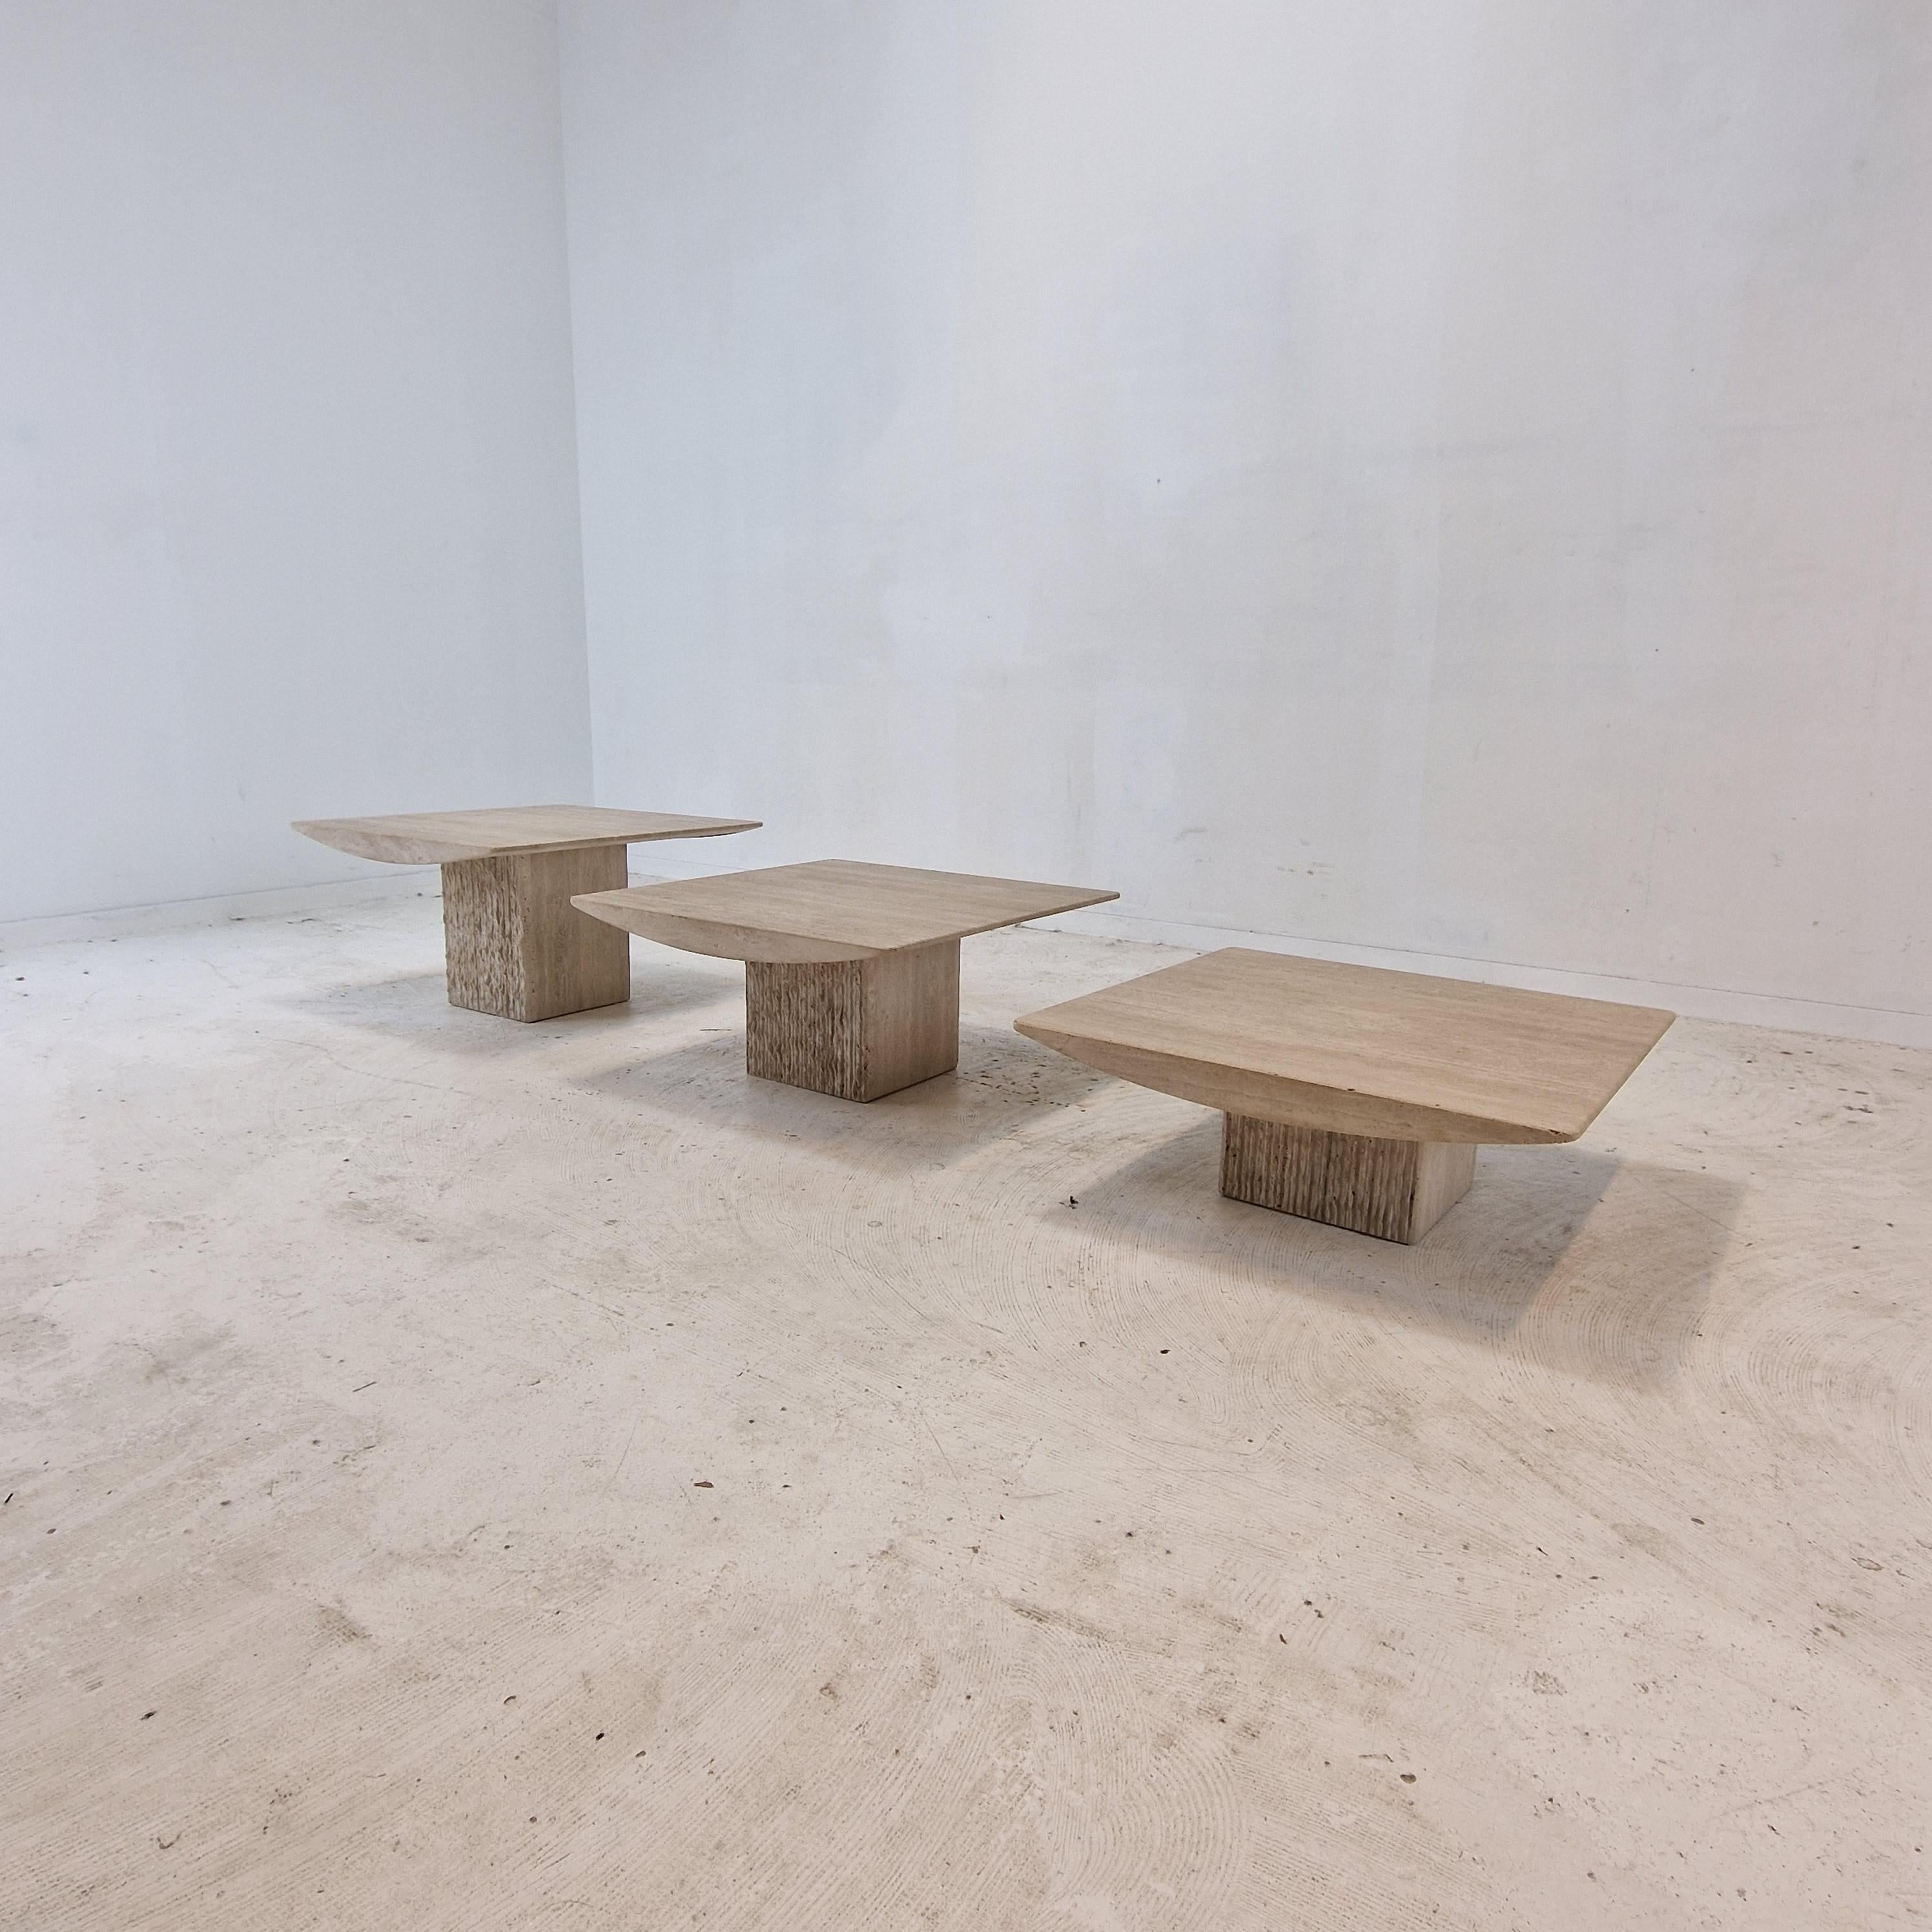 Hand-Crafted Set of 3 Italian Travertine Coffee or Side Tables, 1980s For Sale